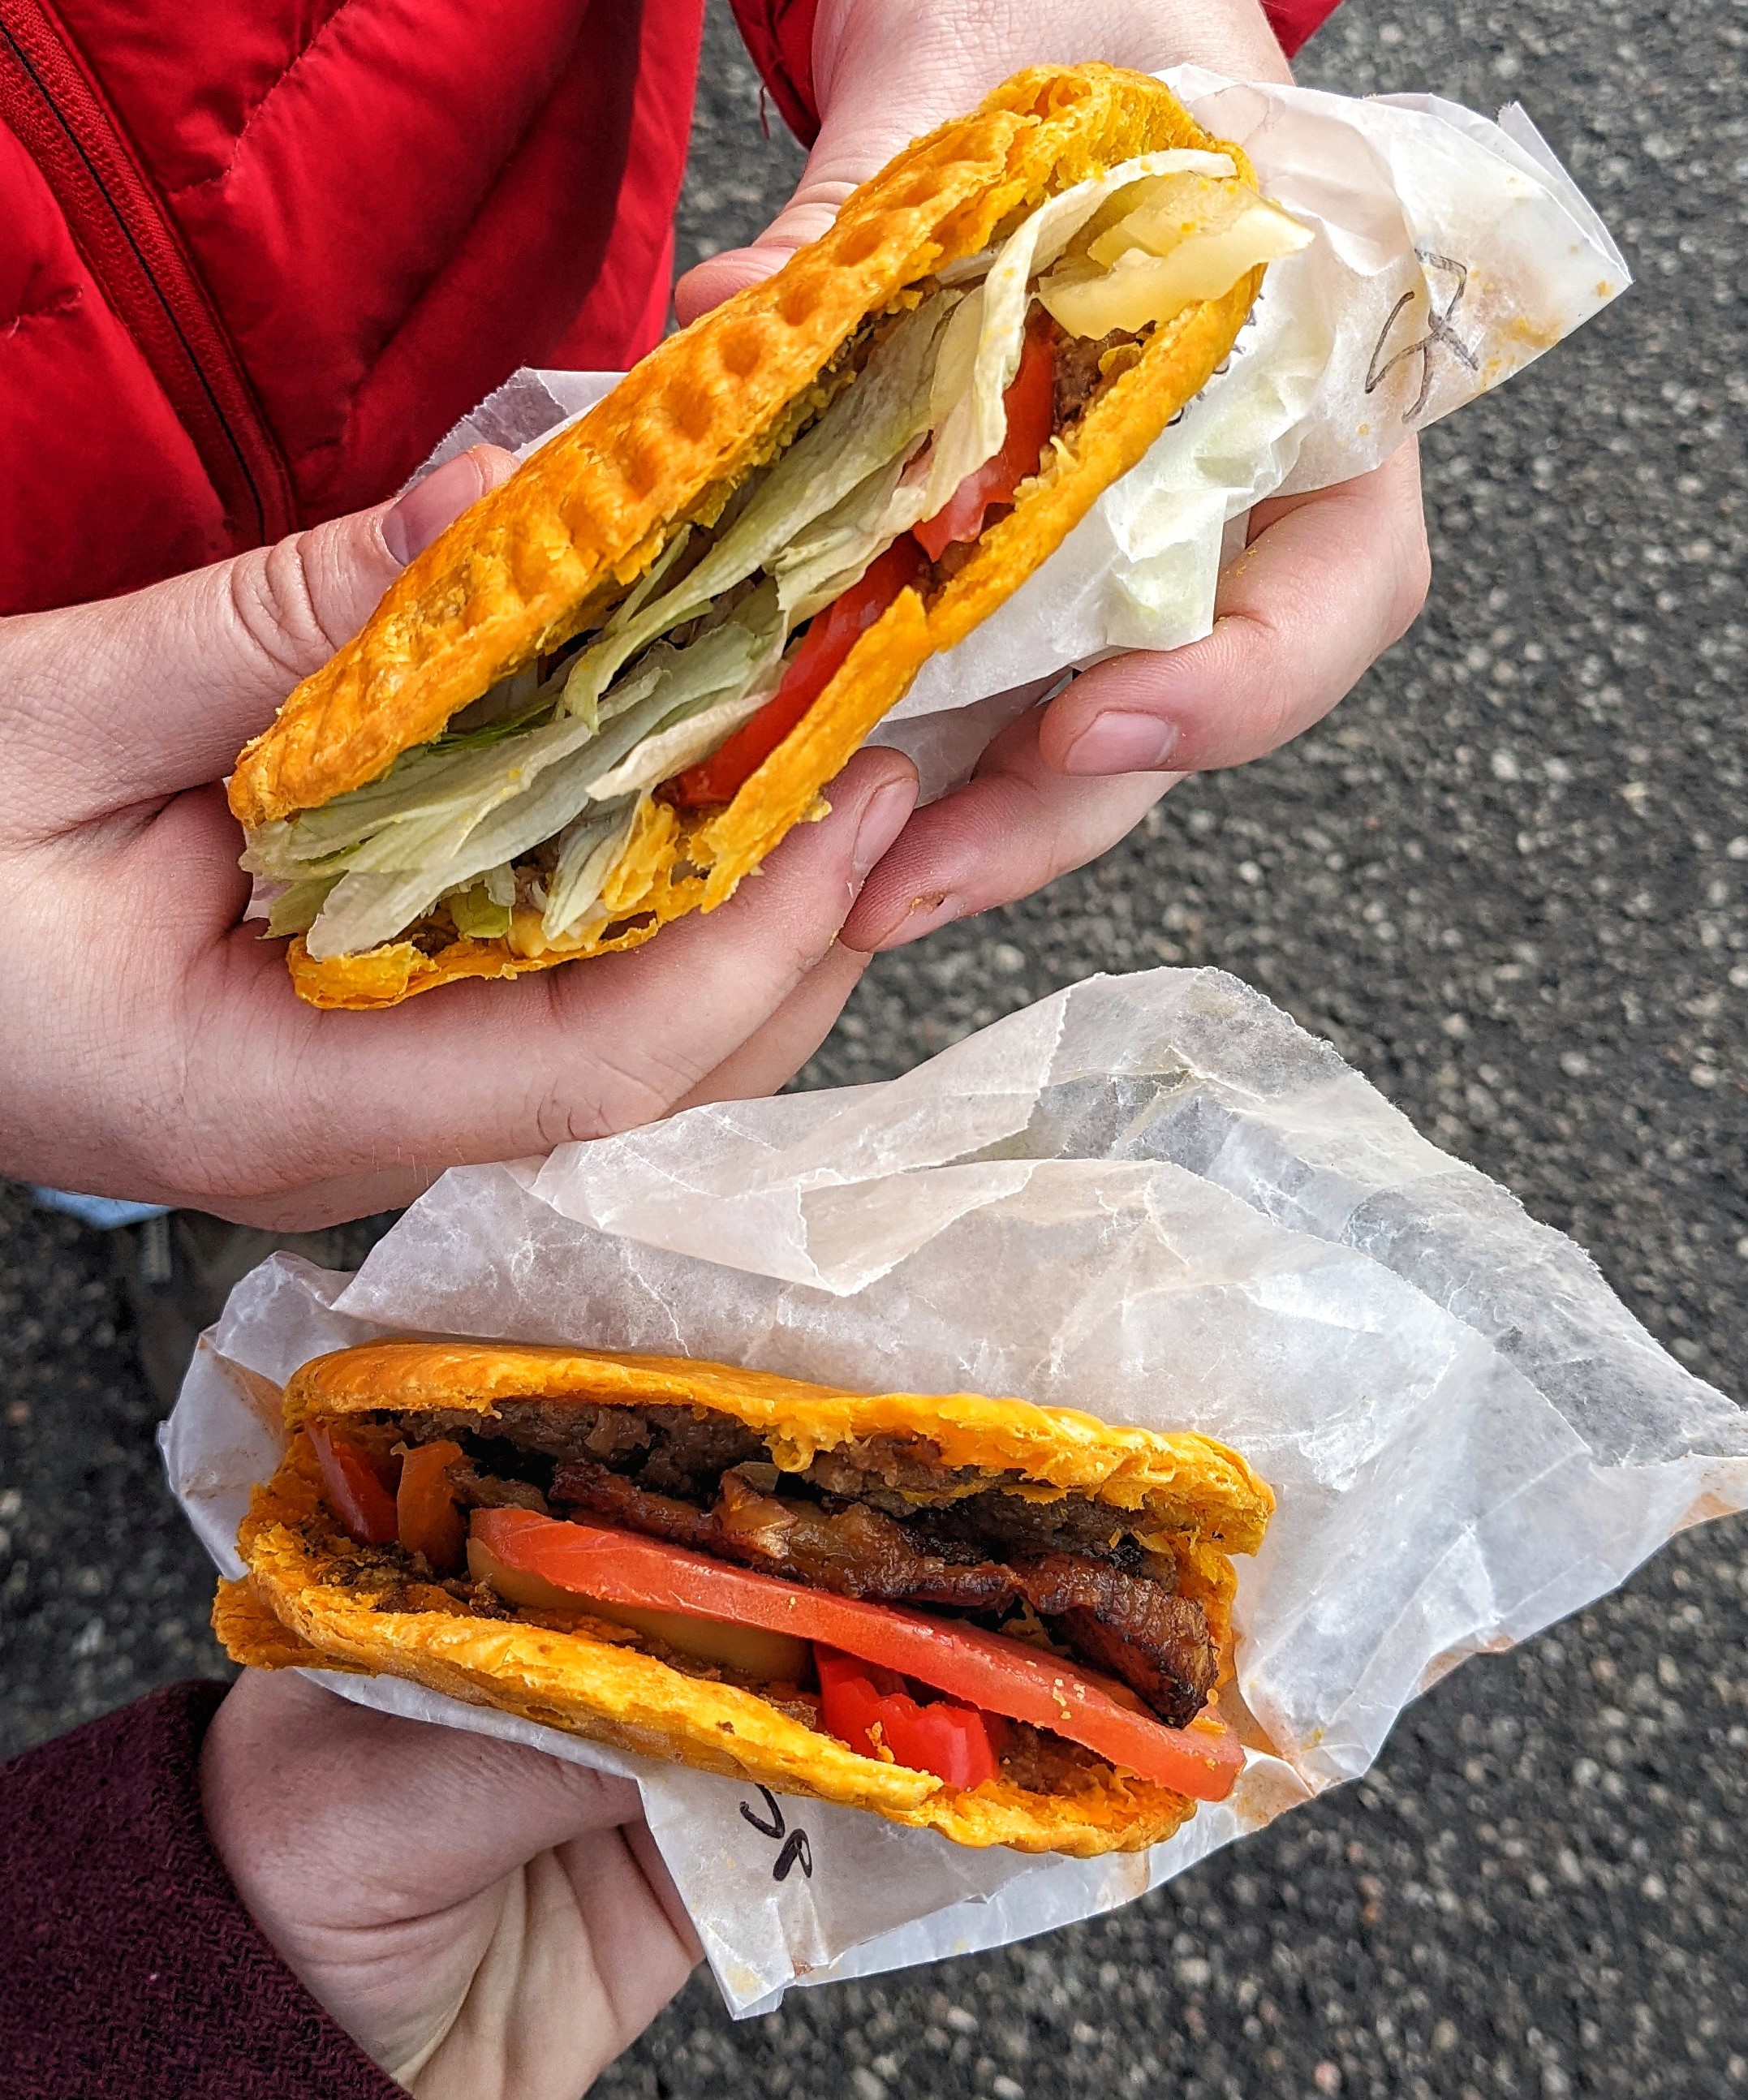 Aerial image of two people holding stuffed Jamaican patties